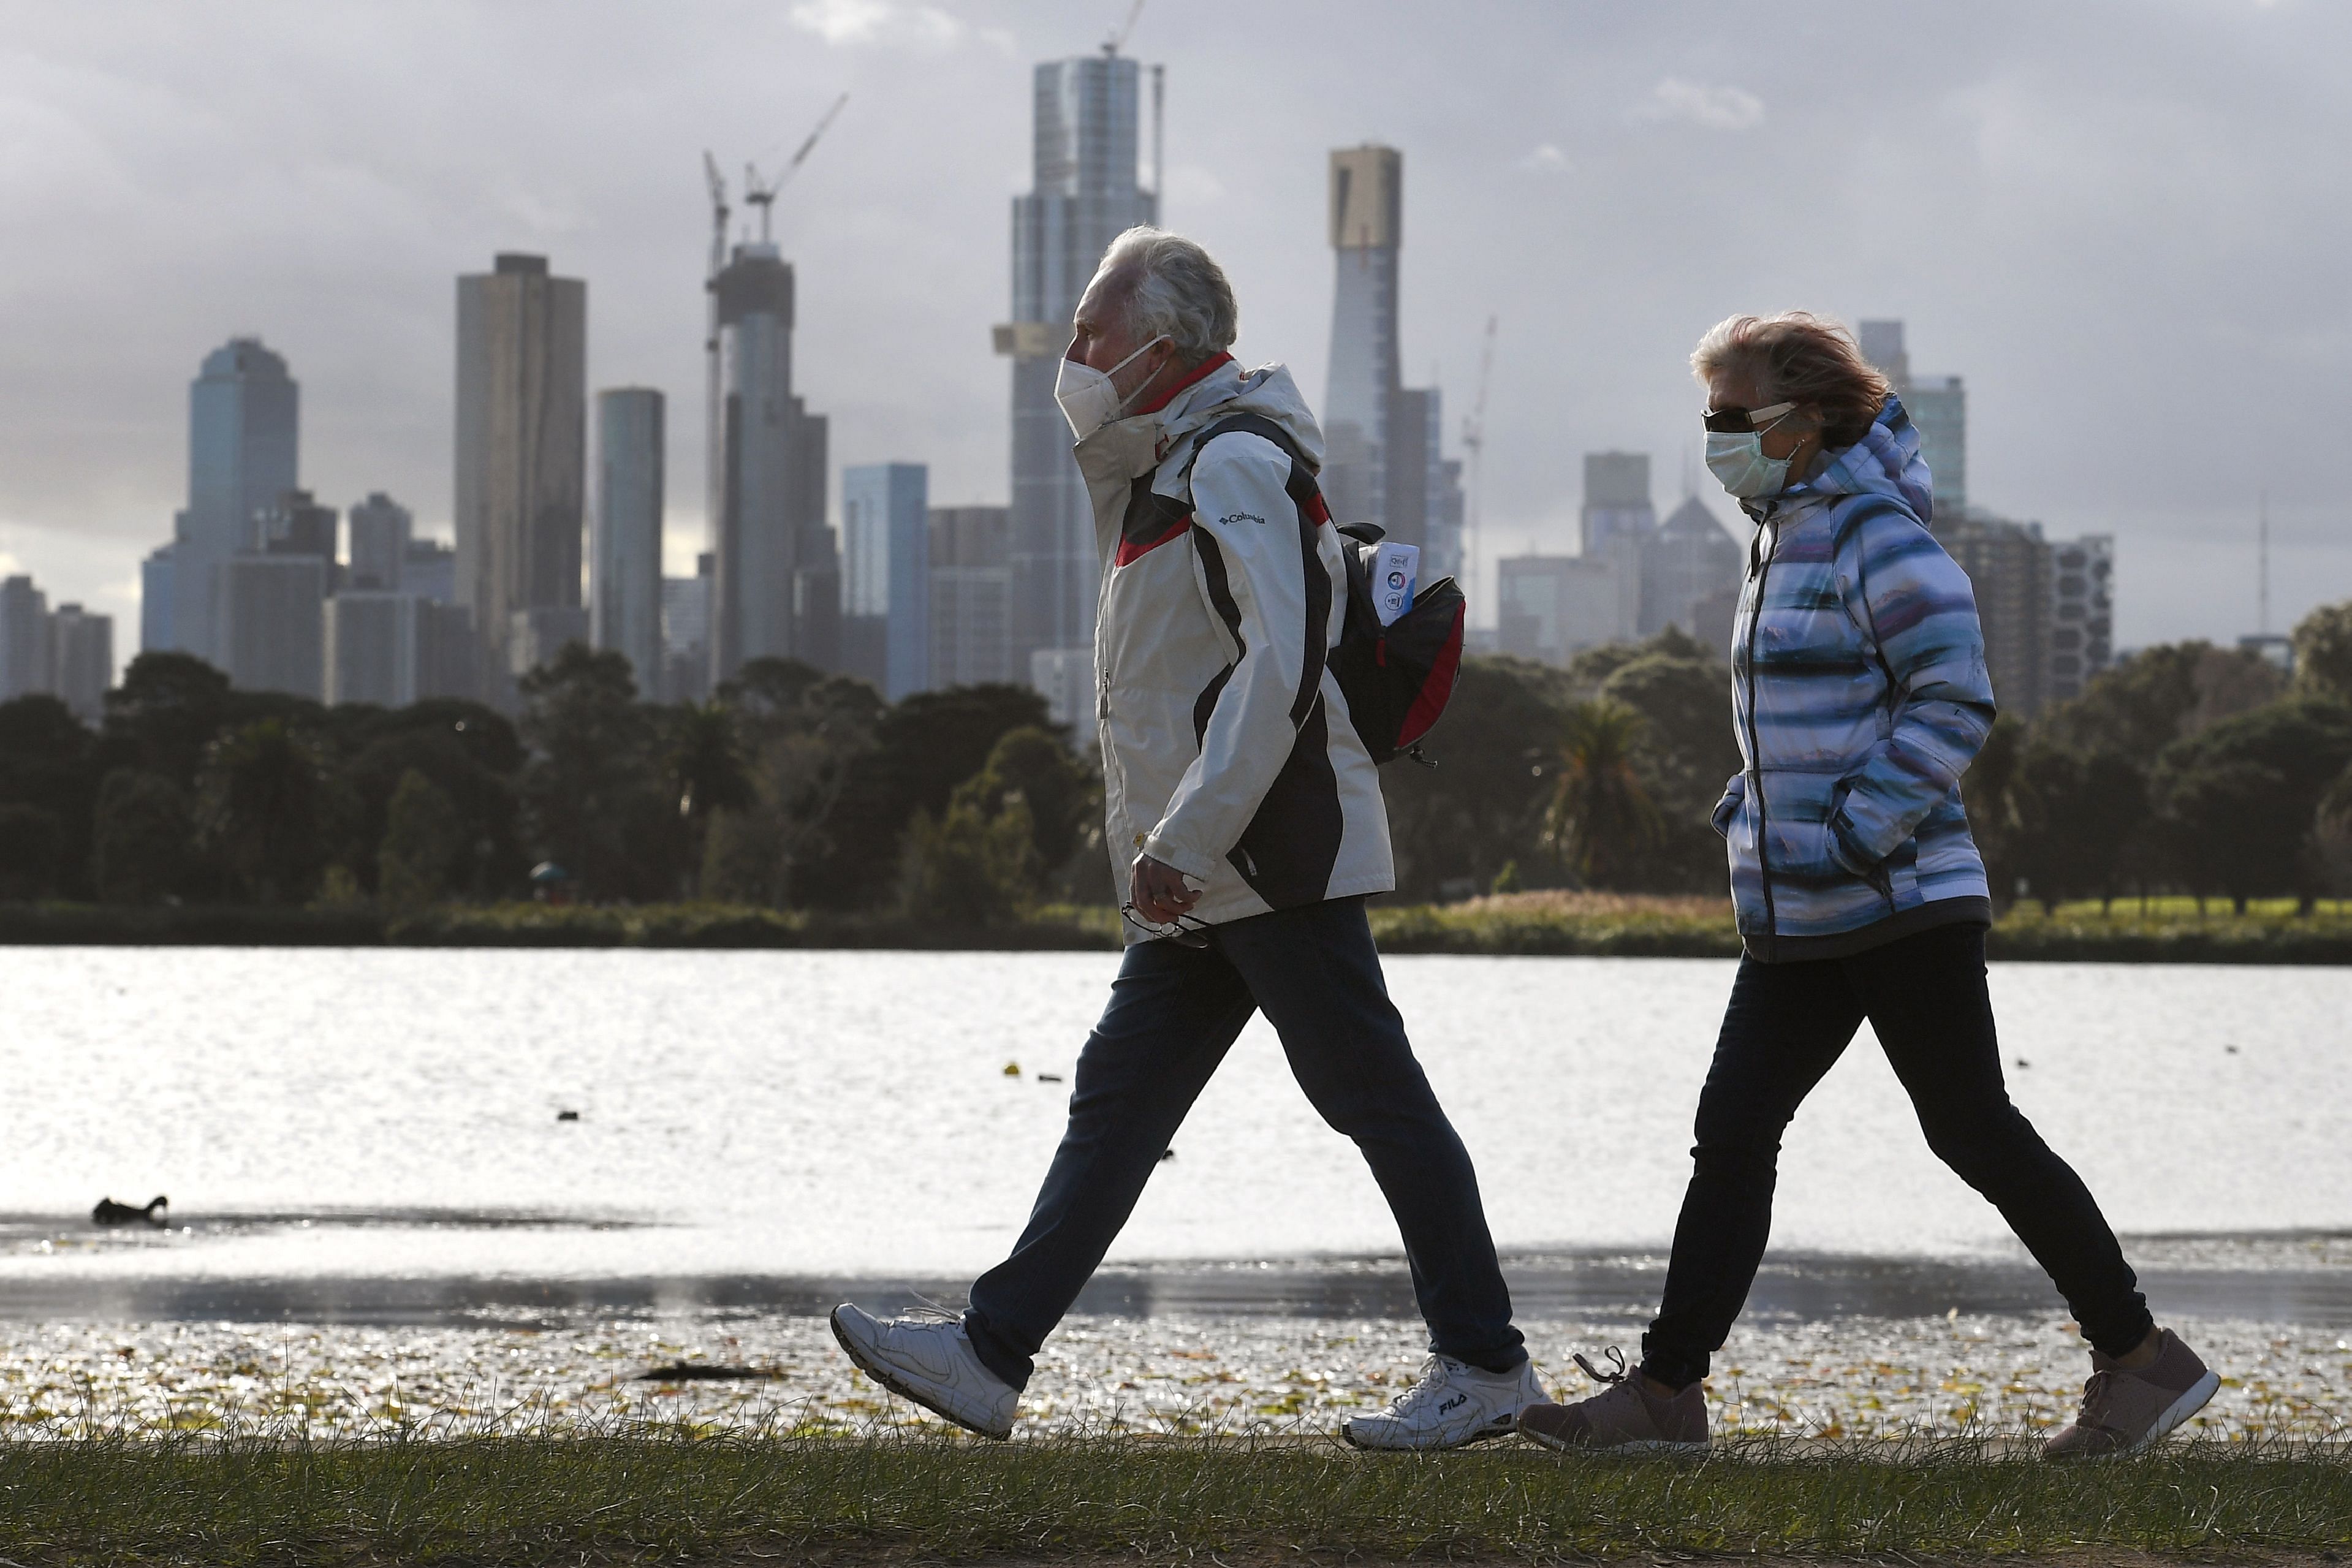 People walk along Albert Park lake in Melbourne on July 13, 2020, as five million people in Australia's second-biggest city began a new lockdown following a resurgence of coronavirus cases. (Photo by AFP)